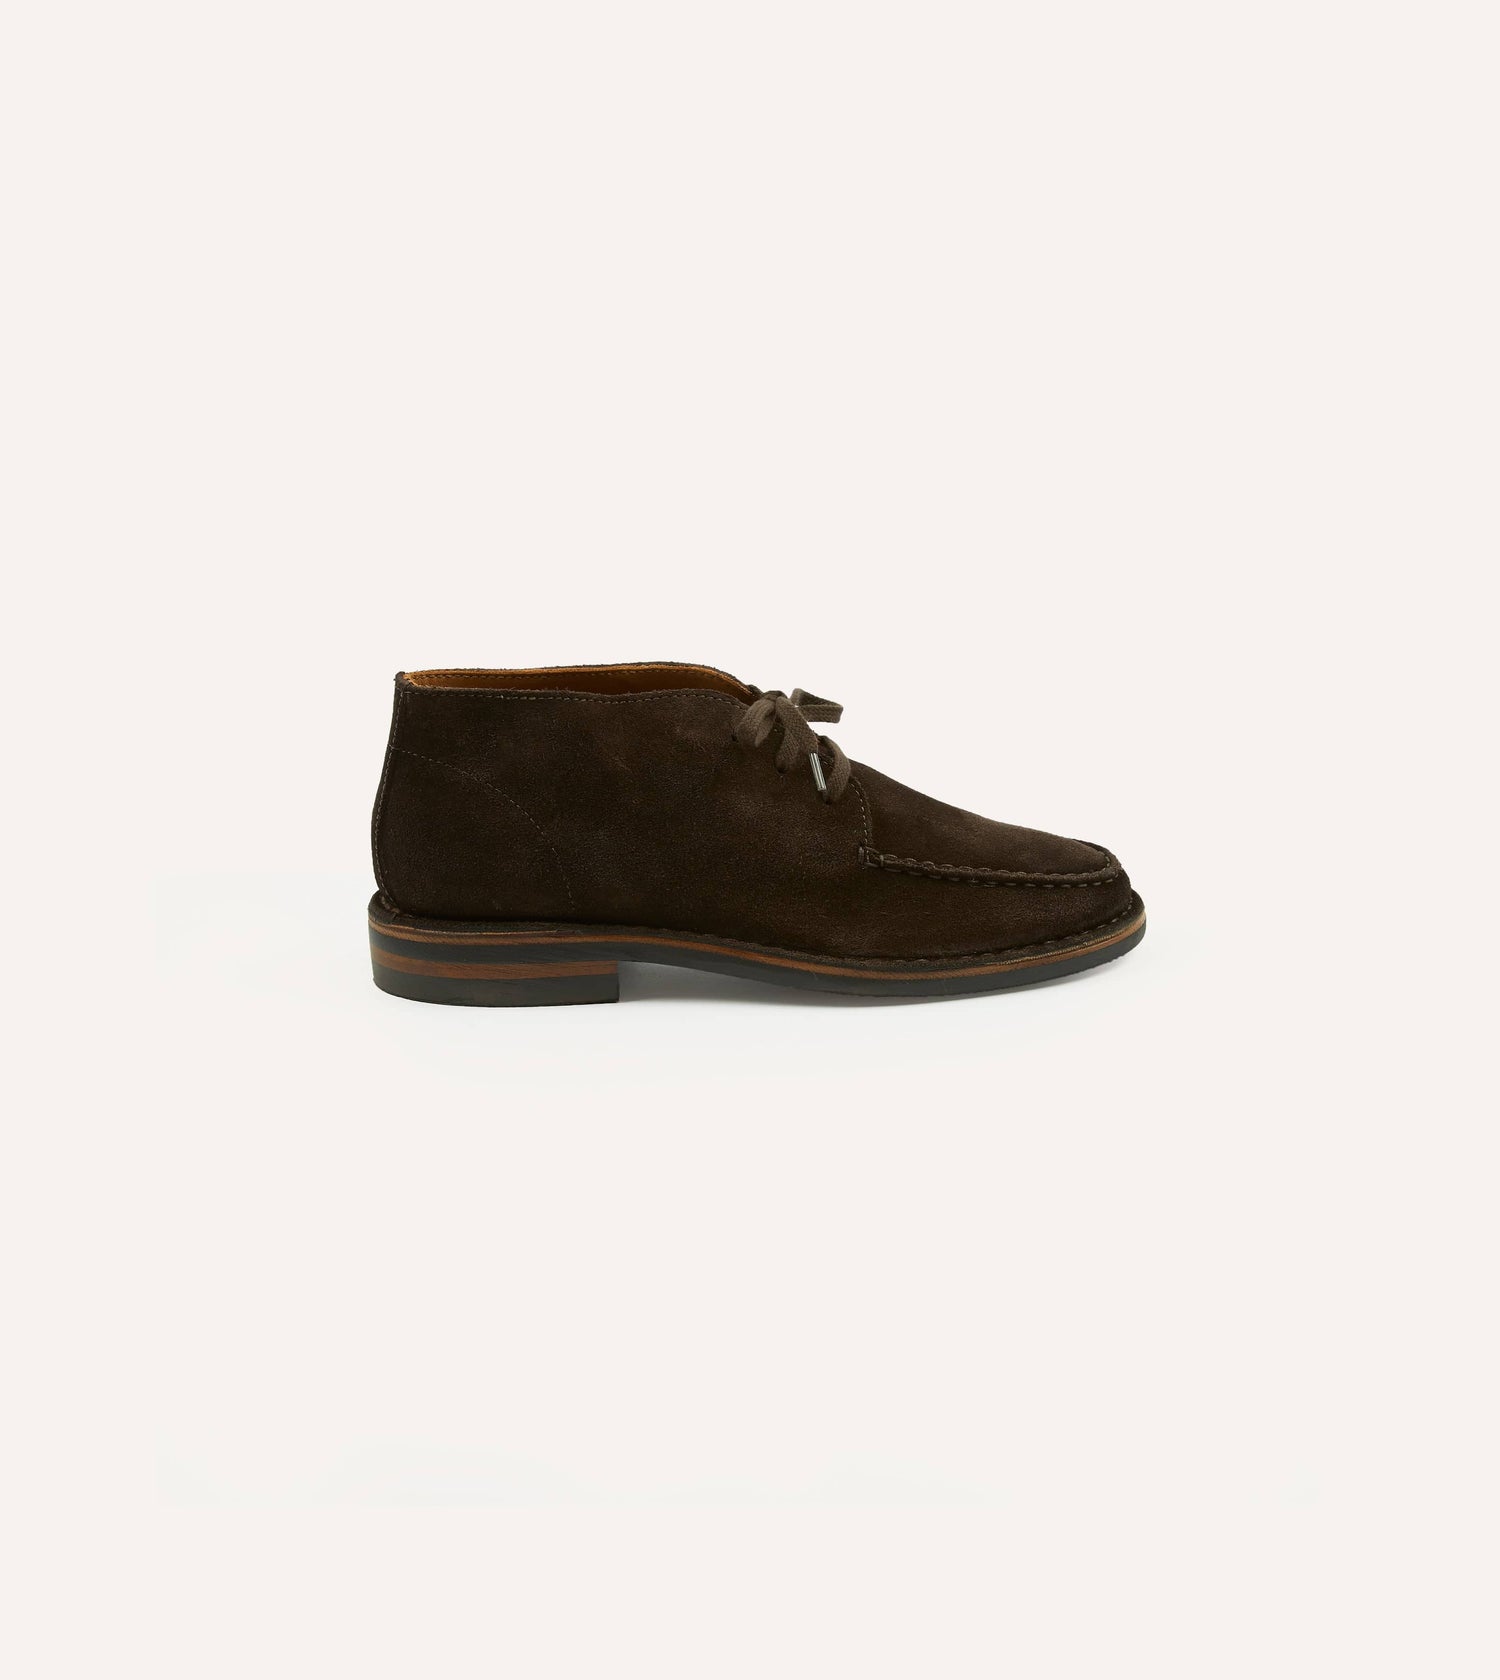 Crosby Moc-Toe Chukka Boot Dark Brown Roughout Suede with Rubber Sole